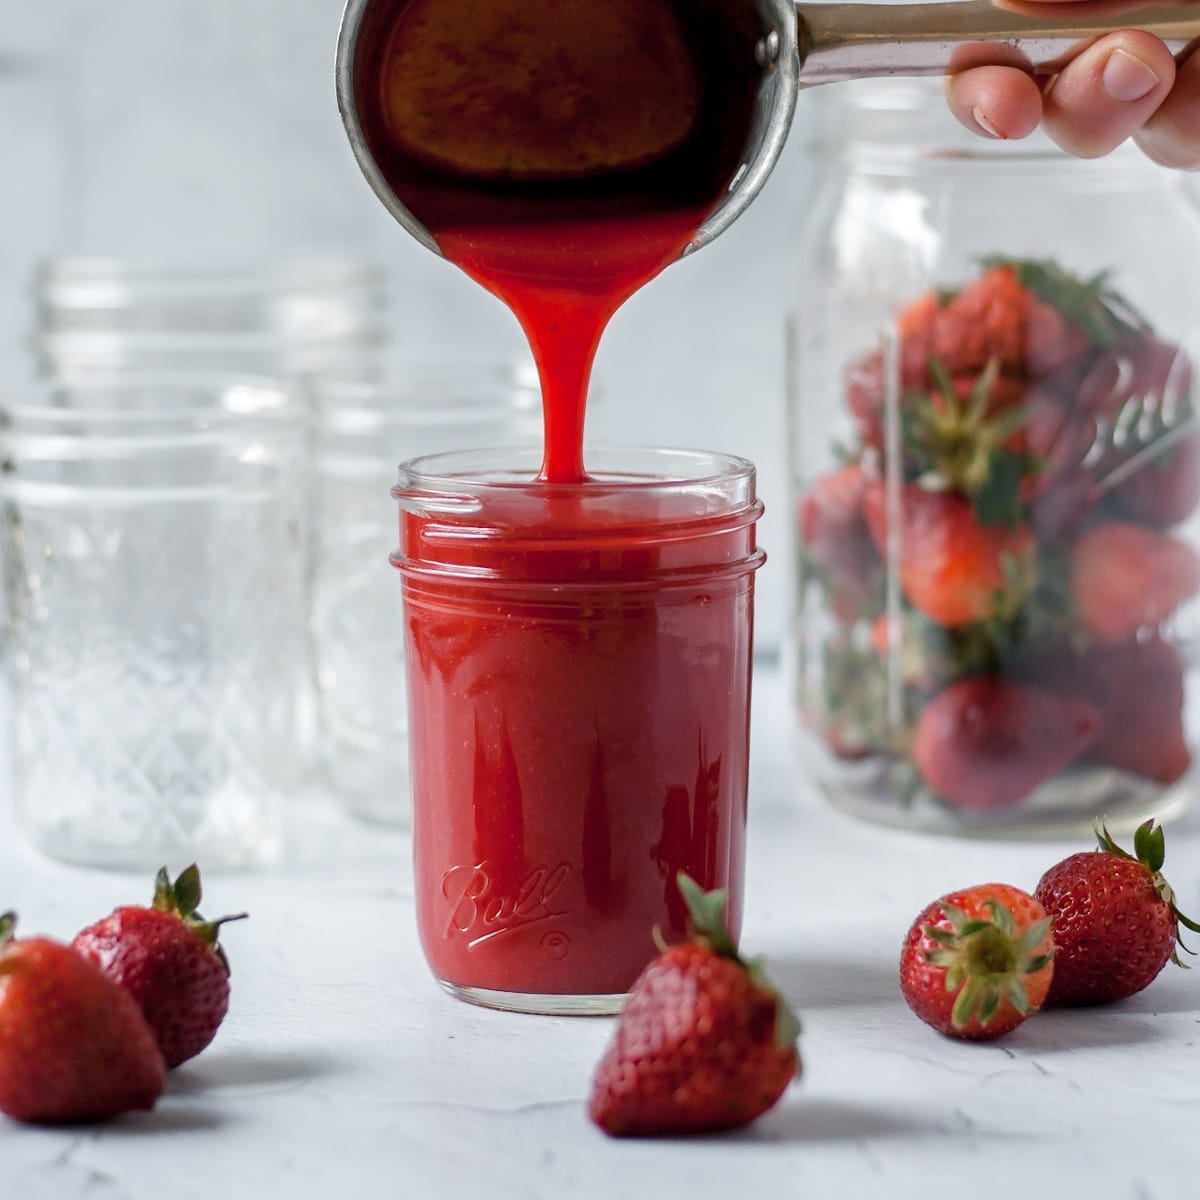 Strawberry coulis being poured into a mason jar, strawberries in background.